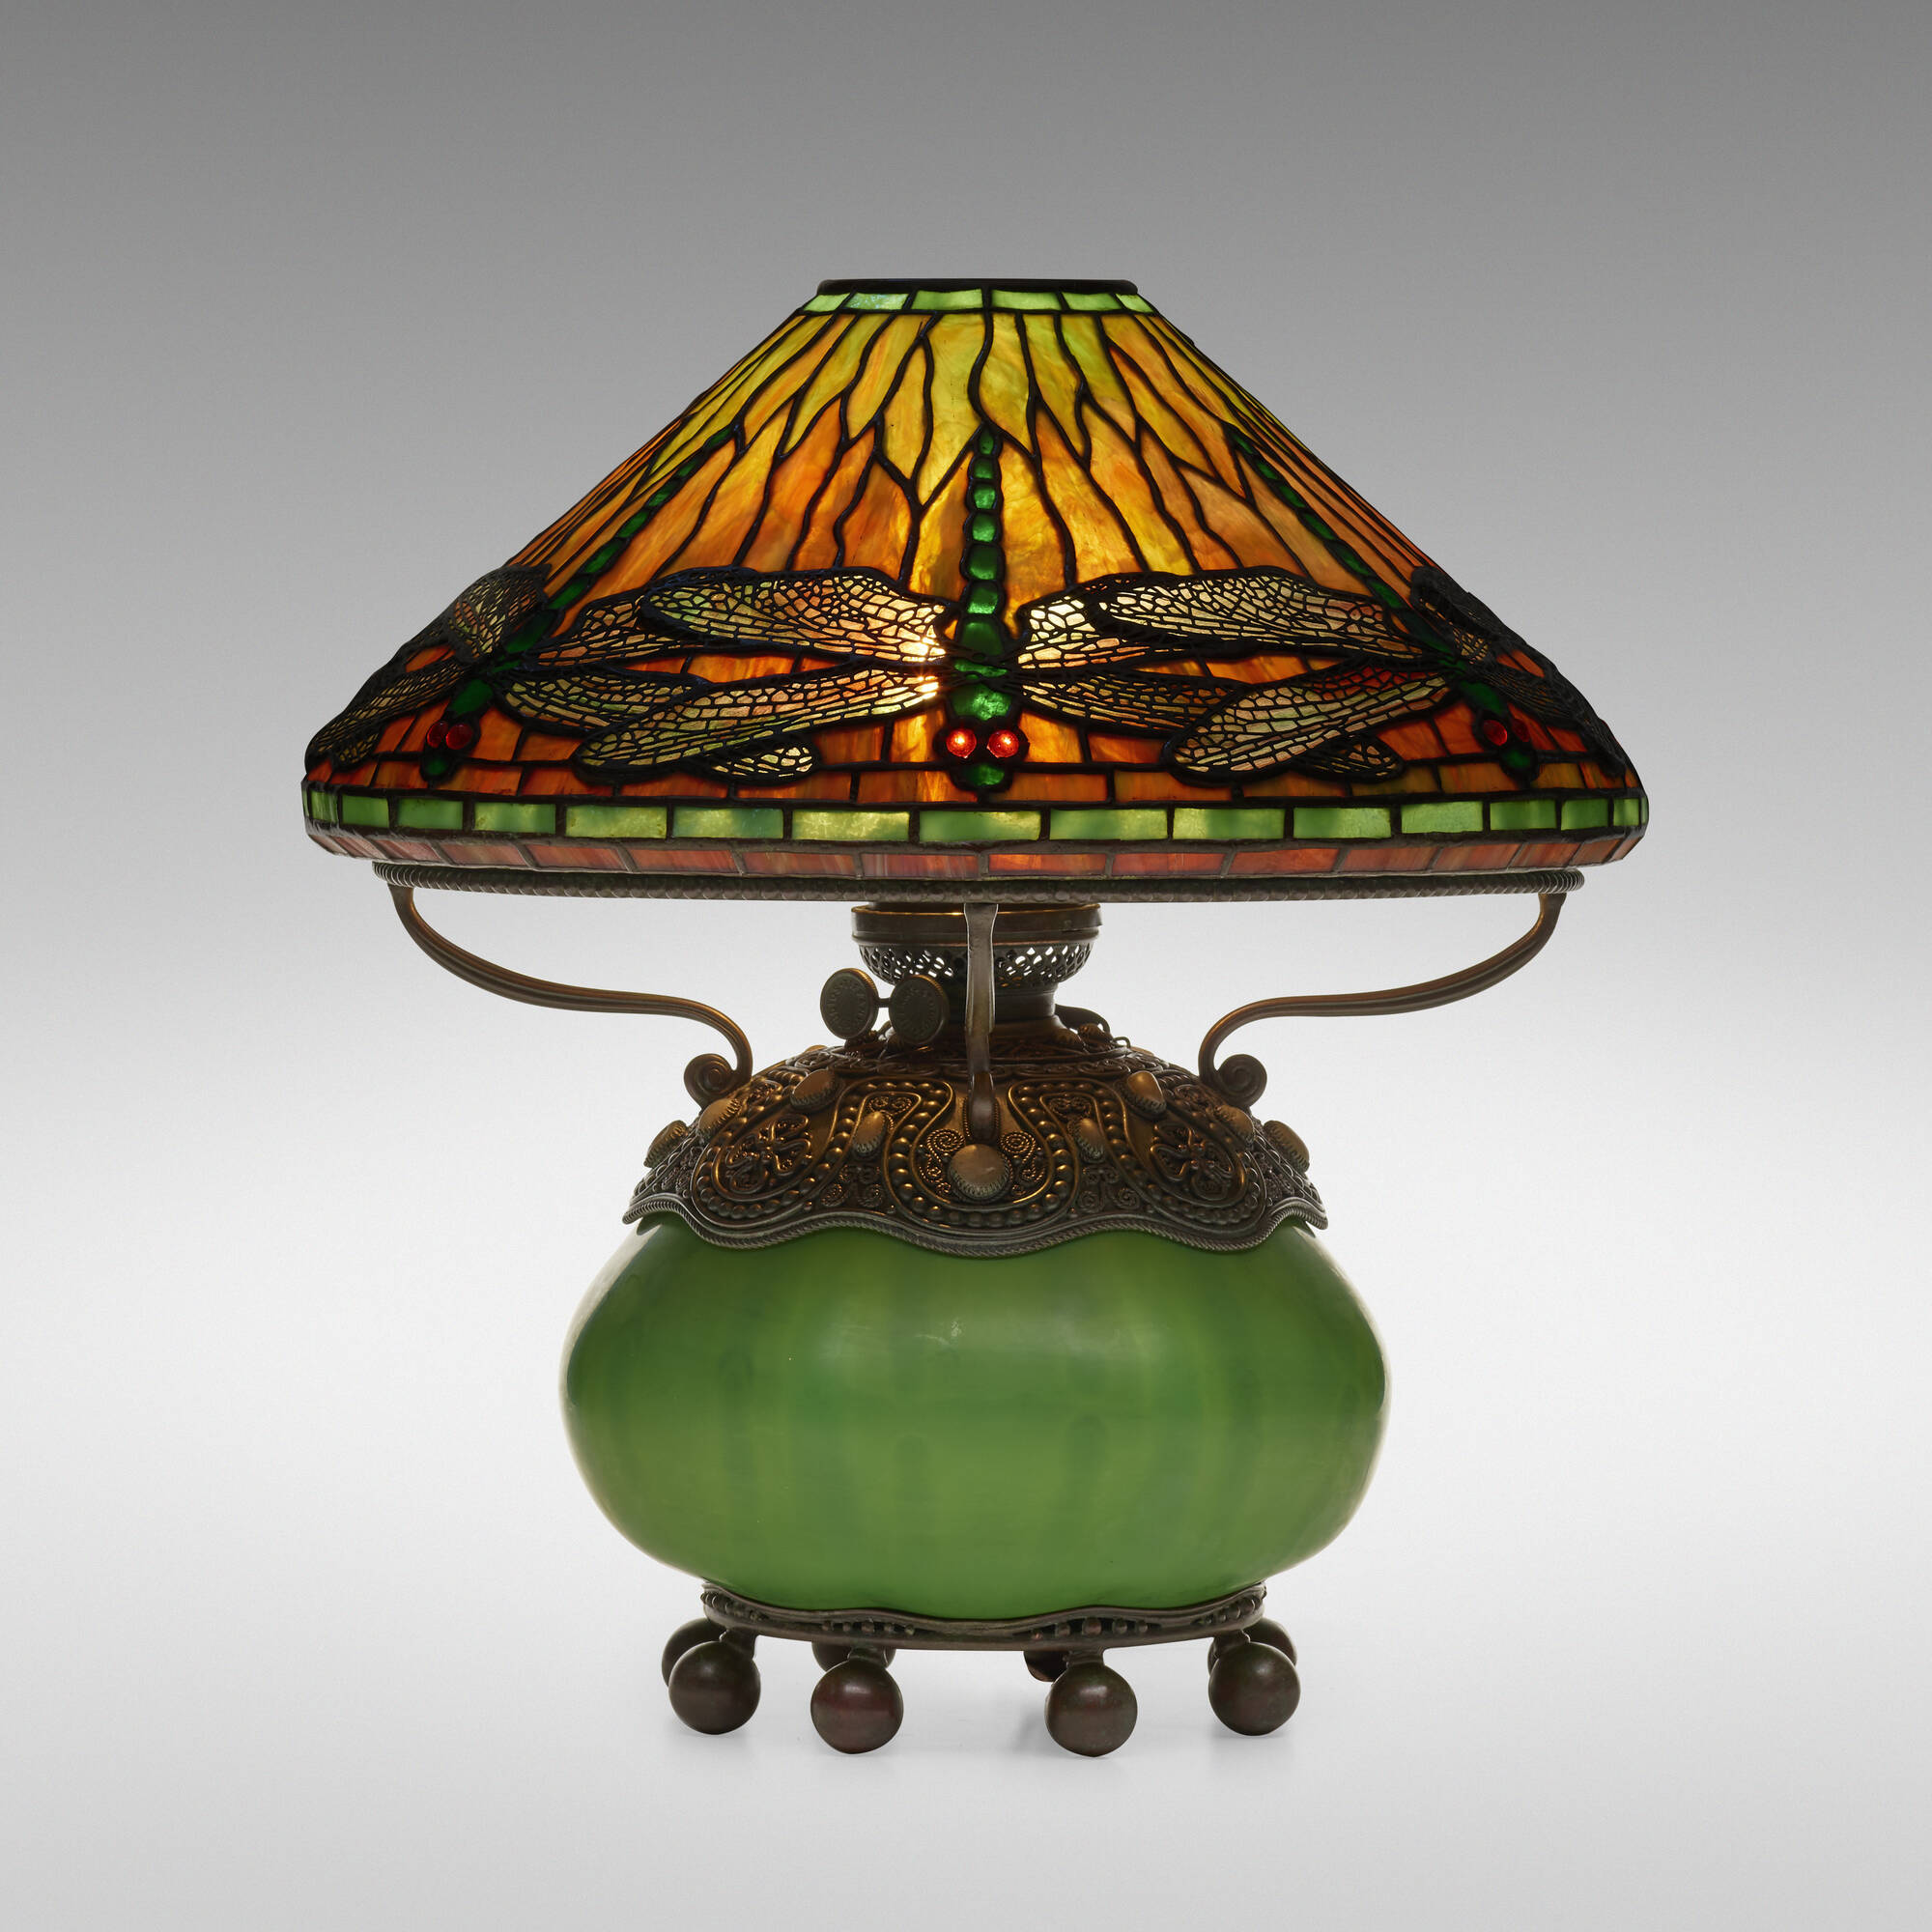 Sold at Auction: Louis Comfort Tiffany, DRAWING FOR A GLASS LAMP SHADE BY  LOUIS C TIFFANY